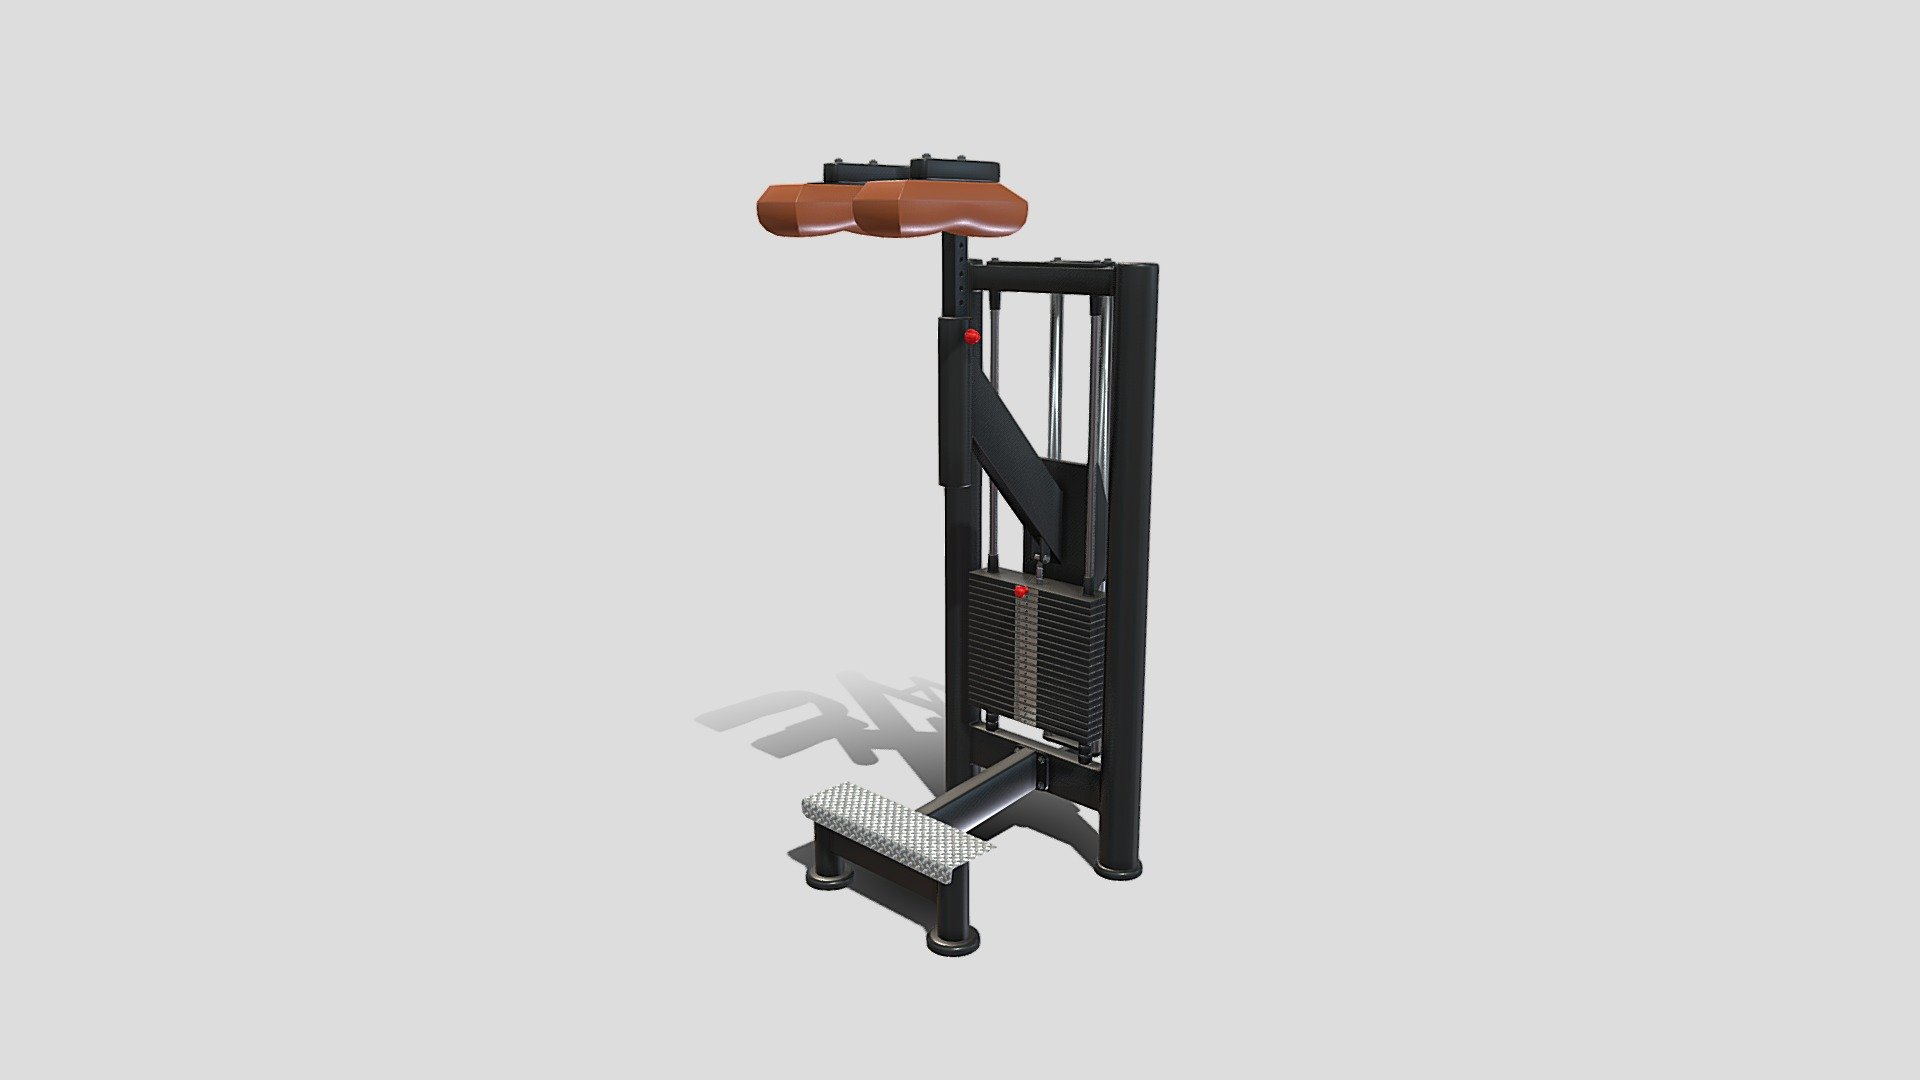 Gym machine 3d model built to real size, rendered with Cycles in Blender, as per seen on attached images. 

File formats:
-.blend, rendered with cycles, as seen in the images;
-.obj, with materials applied;
-.dae, with materials applied;
-.fbx, with materials applied;
-.stl;

Files come named appropriately and split by file format.

3D Software:
The 3D model was originally created in Blender 3.1 and rendered with Cycles.

Materials and textures:
The models have materials applied in all formats, and are ready to import and render.
Materials are image based using PBR, the model comes with five 4k png image textures.

Preview scenes:
The preview images are rendered in Blender using its built-in render engine &lsquo;Cycles'.
Note that the blend files come directly with the rendering scene included and the render command will generate the exact result as seen in previews.

General:
The models are built mostly out of quads.

For any problems please feel free to contact me.

Don't forget to rate and enjoy! - Standing calf machine - Buy Royalty Free 3D model by dragosburian 3d model